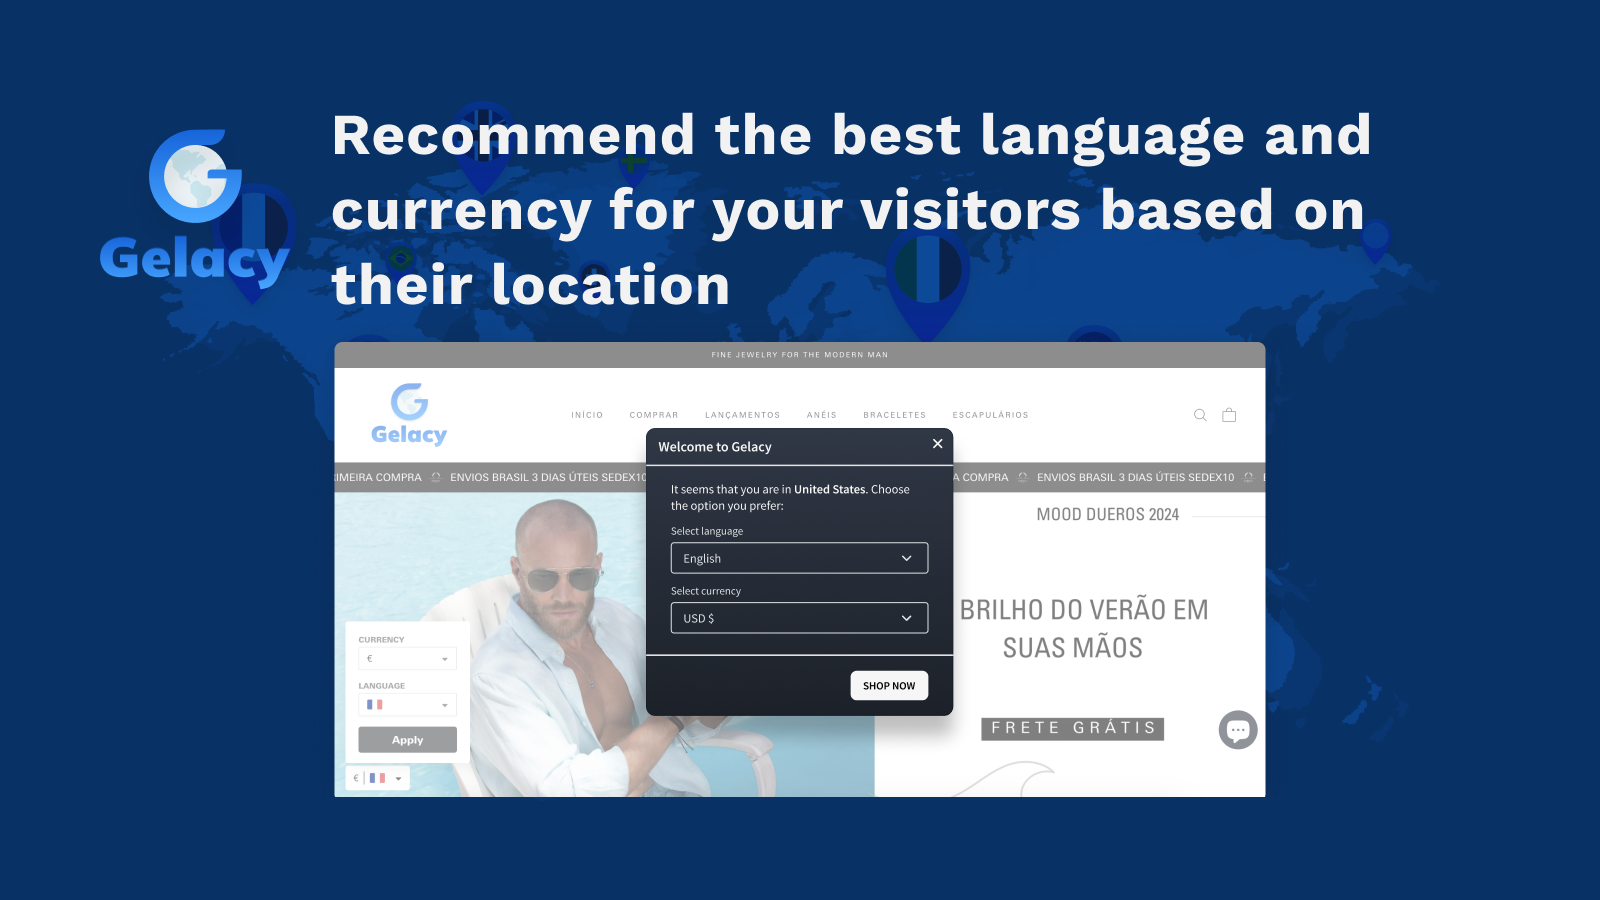 Recommend the best language and currency for your visitors based